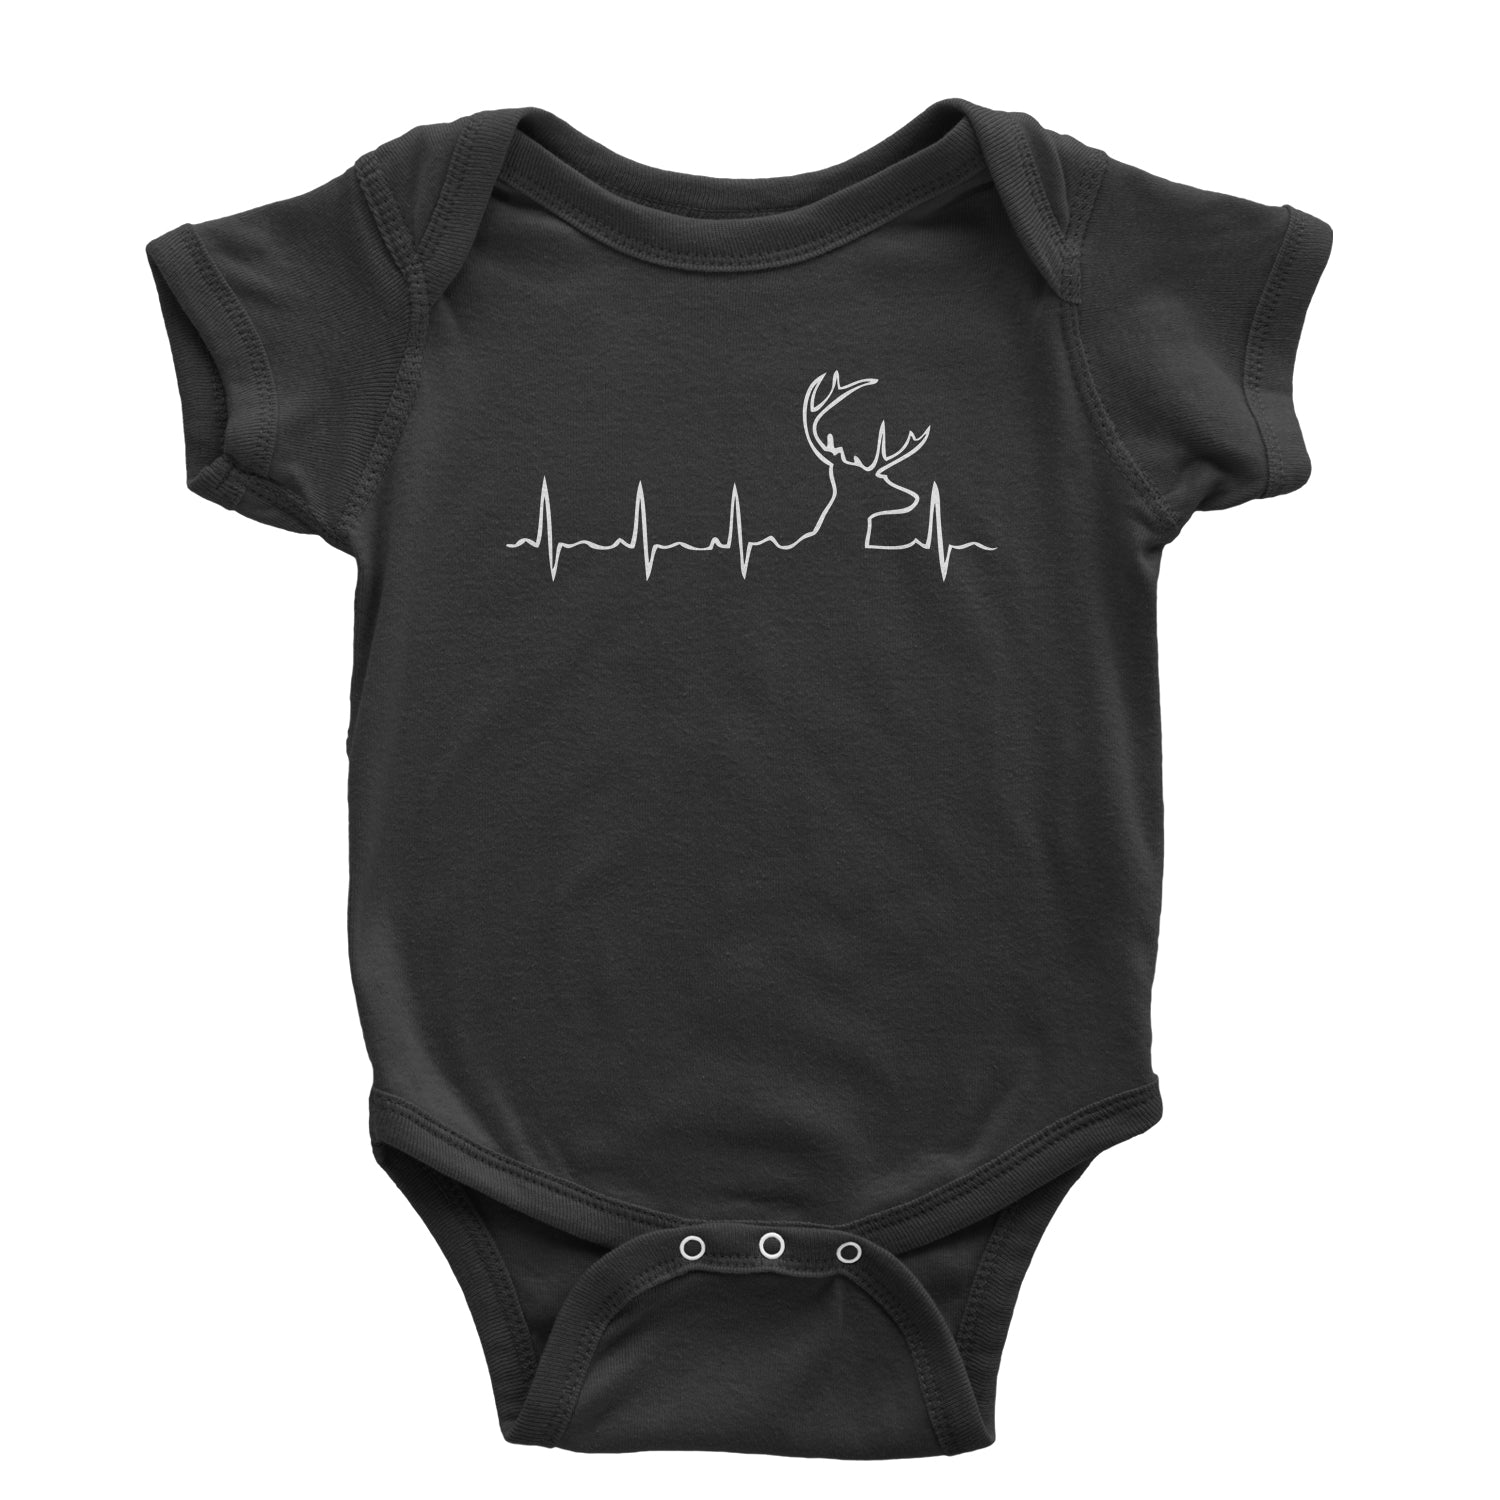 Hunting Heartbeat Dear Head Infant One-Piece Romper Bodysuit and Toddler T-shirt #expressiontees by Expression Tees